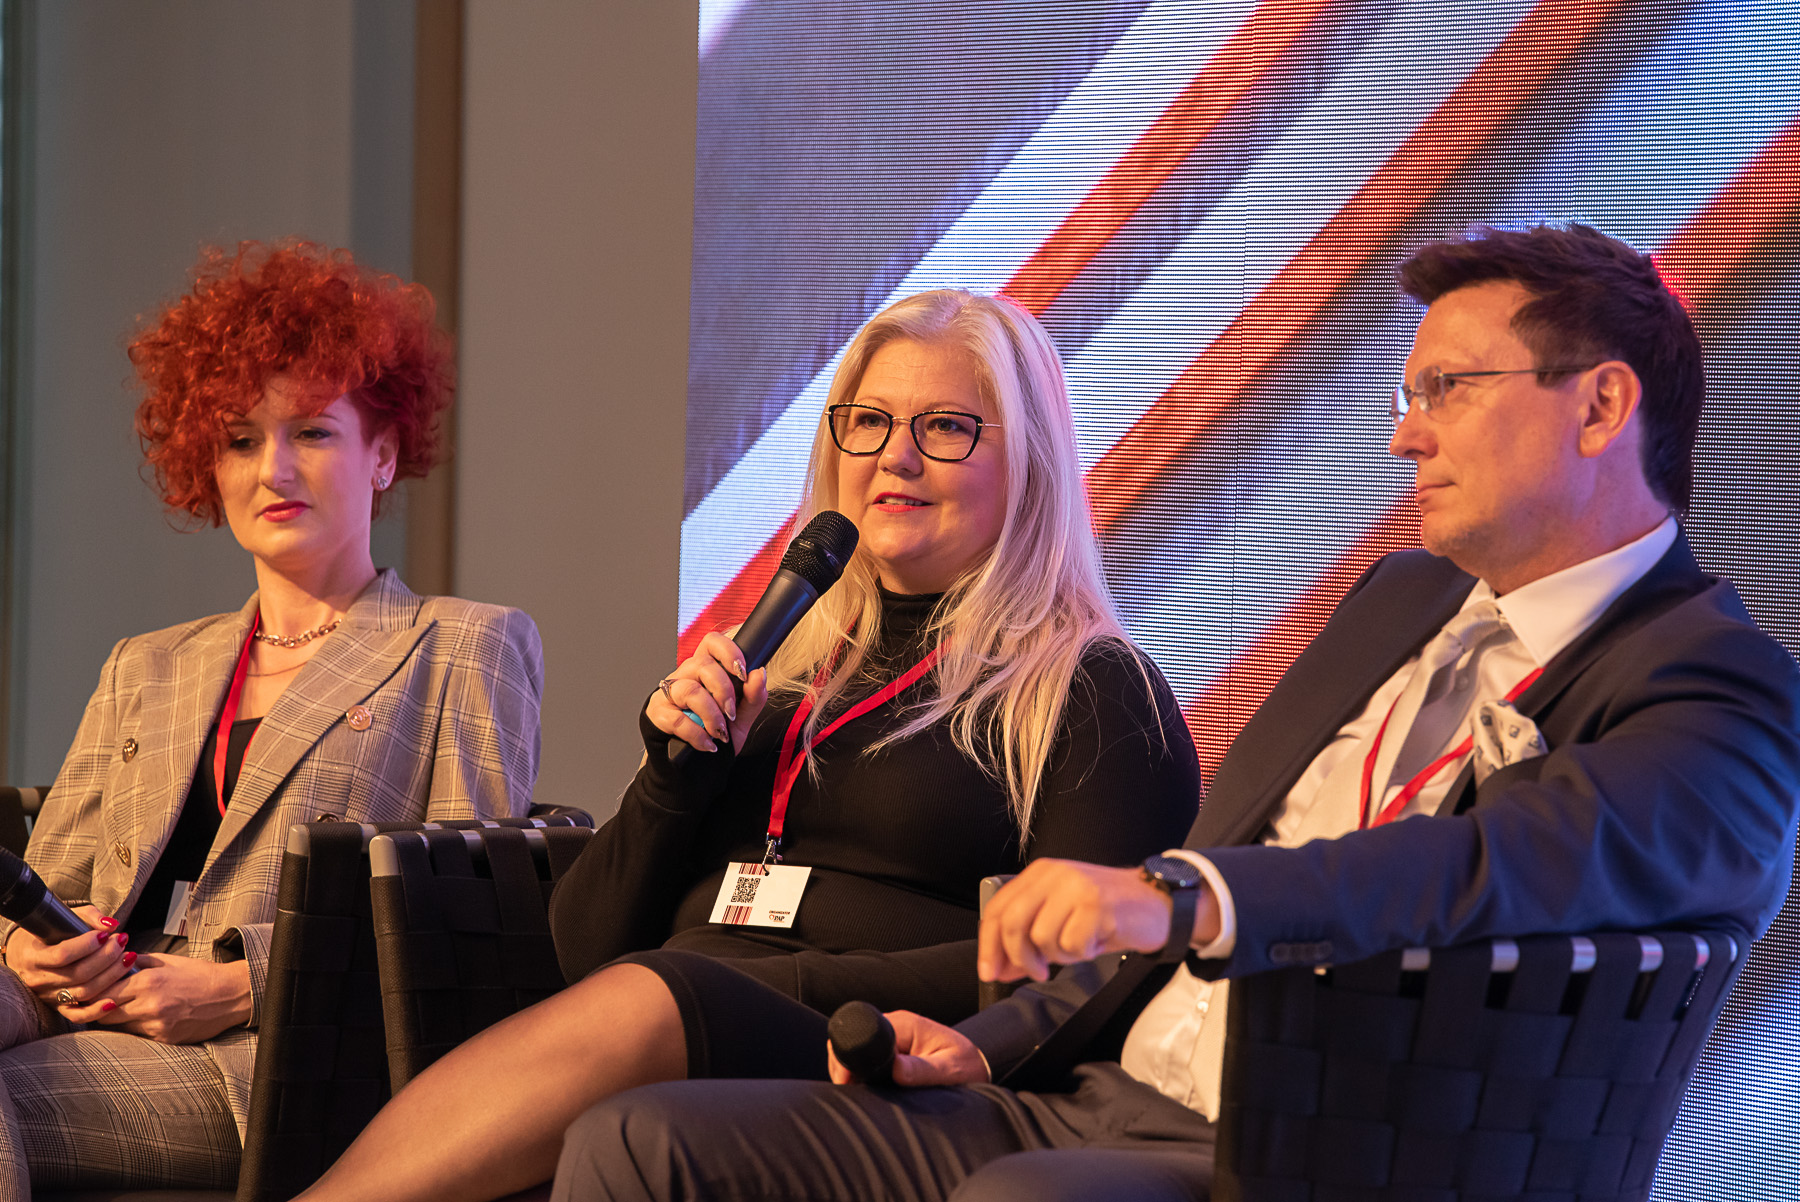 Agnieszka Szewczyk, the owner and president of C.P.E.T. Kedarix, took part in the discussion panel